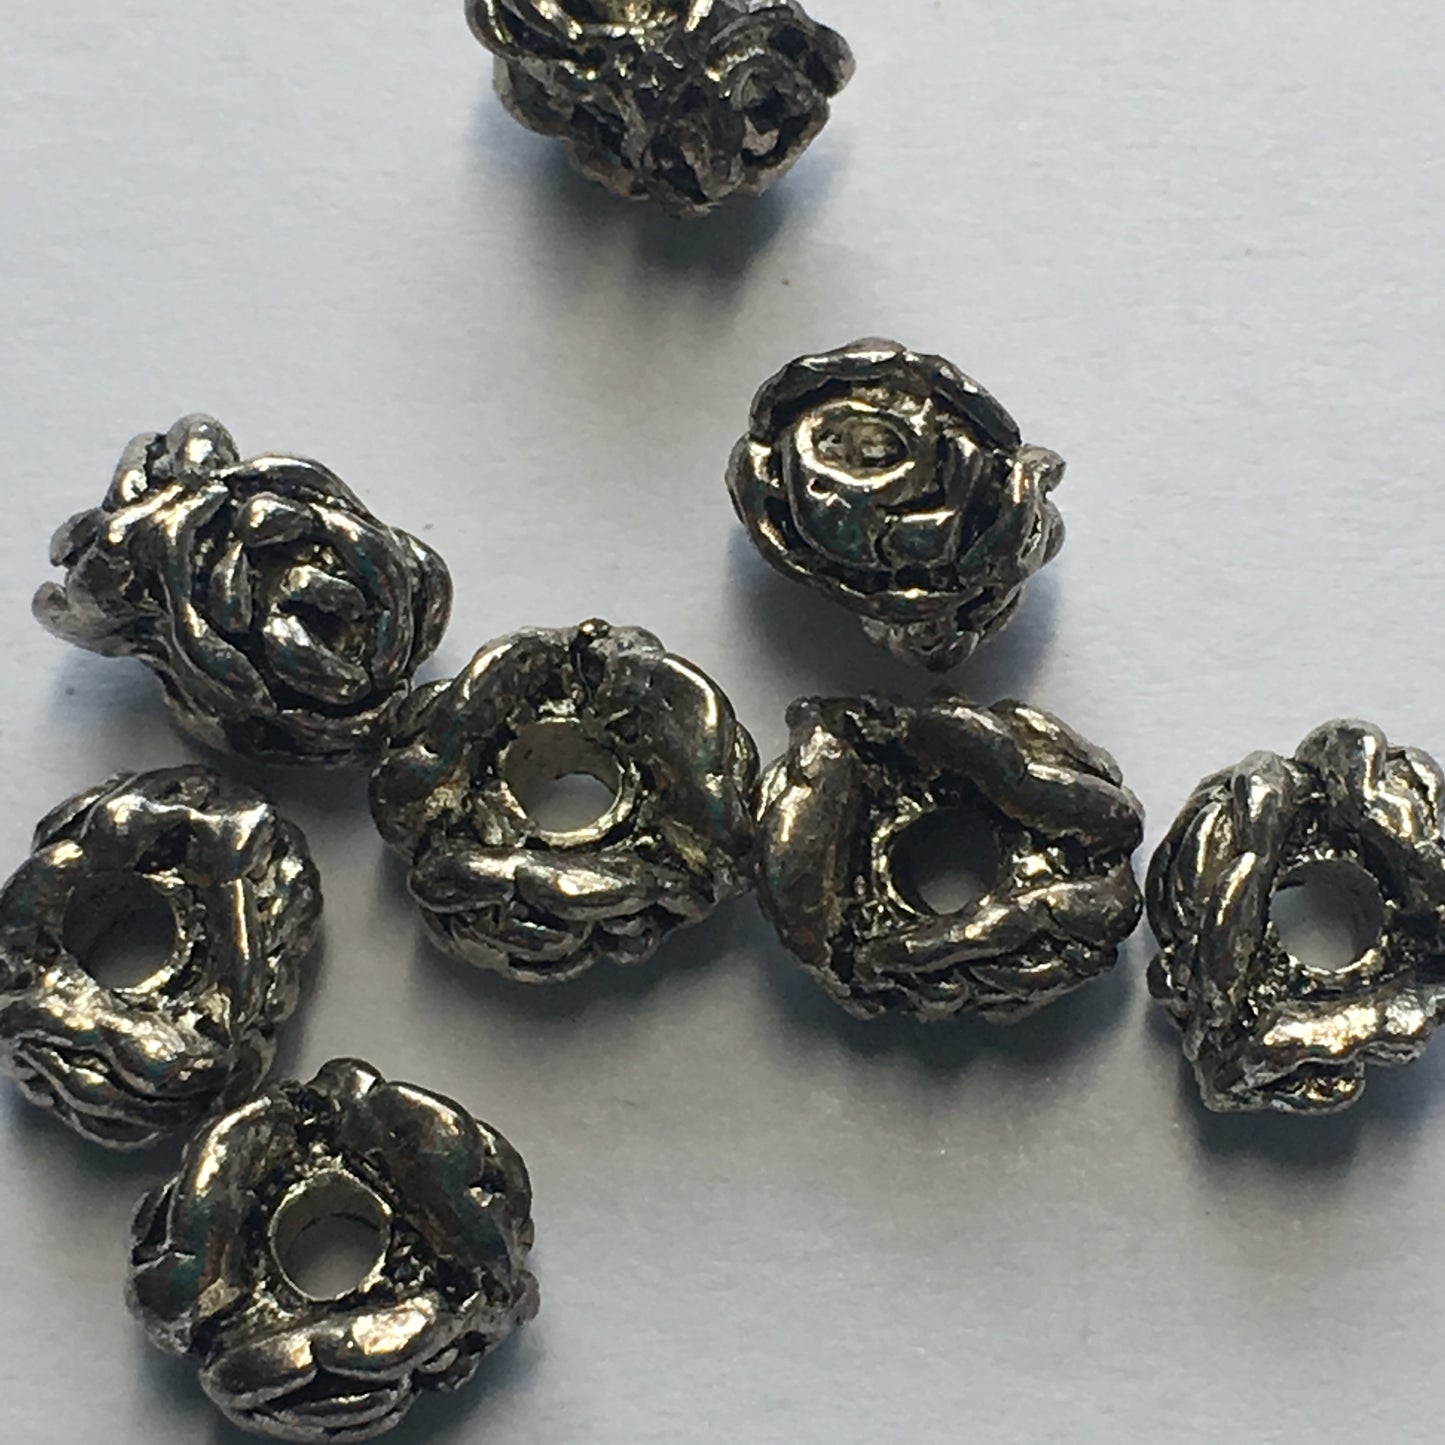 Antique Silver Bali Style Spacer Beads, 8 x 5 mm - 8 Beads